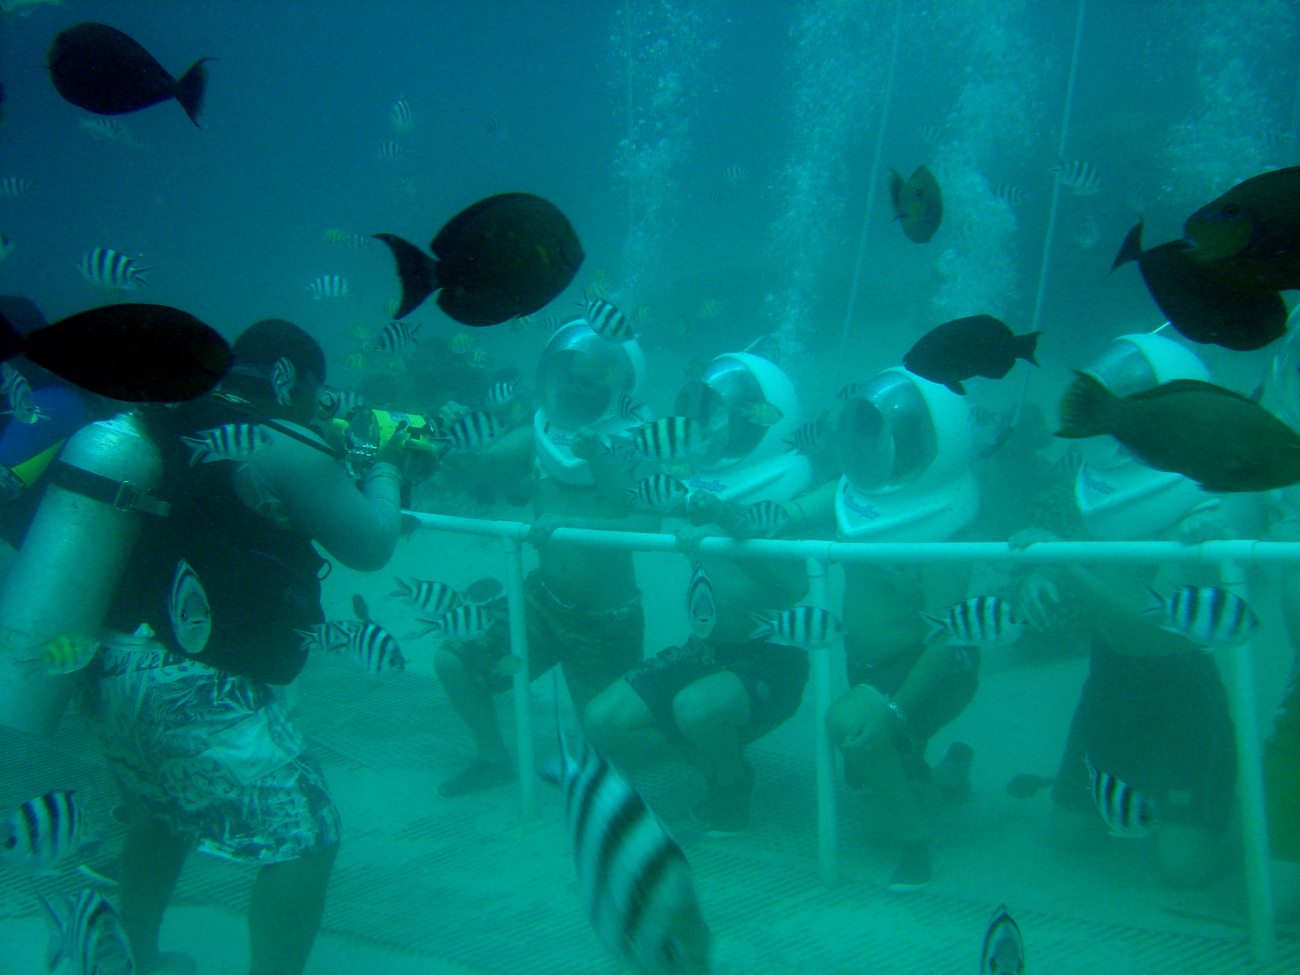 Photographing tourists at a Guam reef attraction